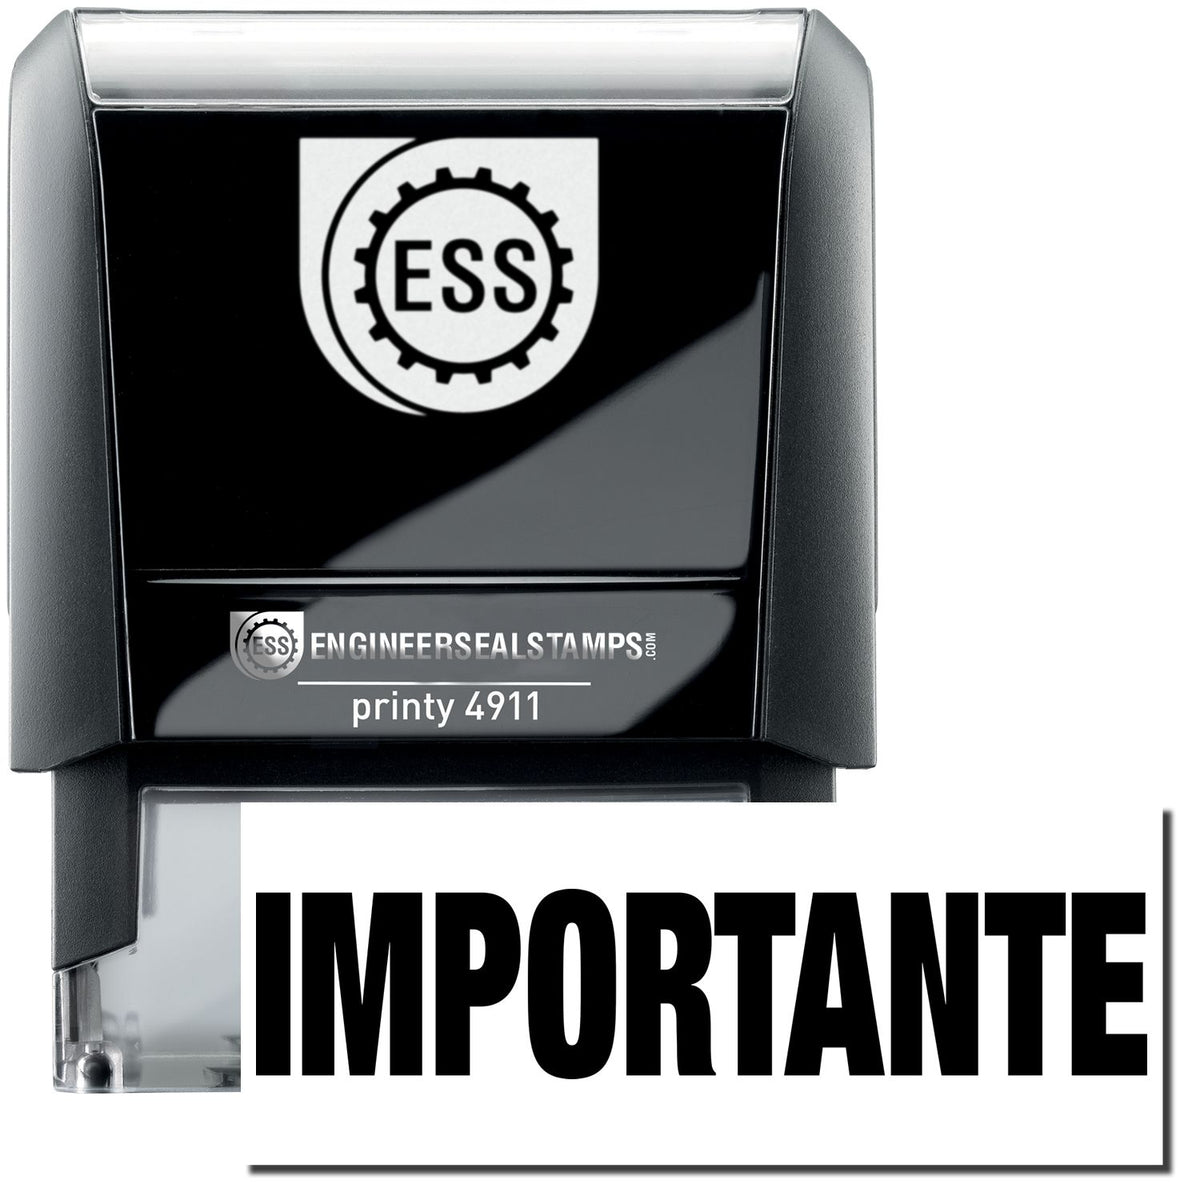 A self-inking stamp with a stamped image showing how the text &quot;IMPORTANTE&quot; is displayed after stamping.